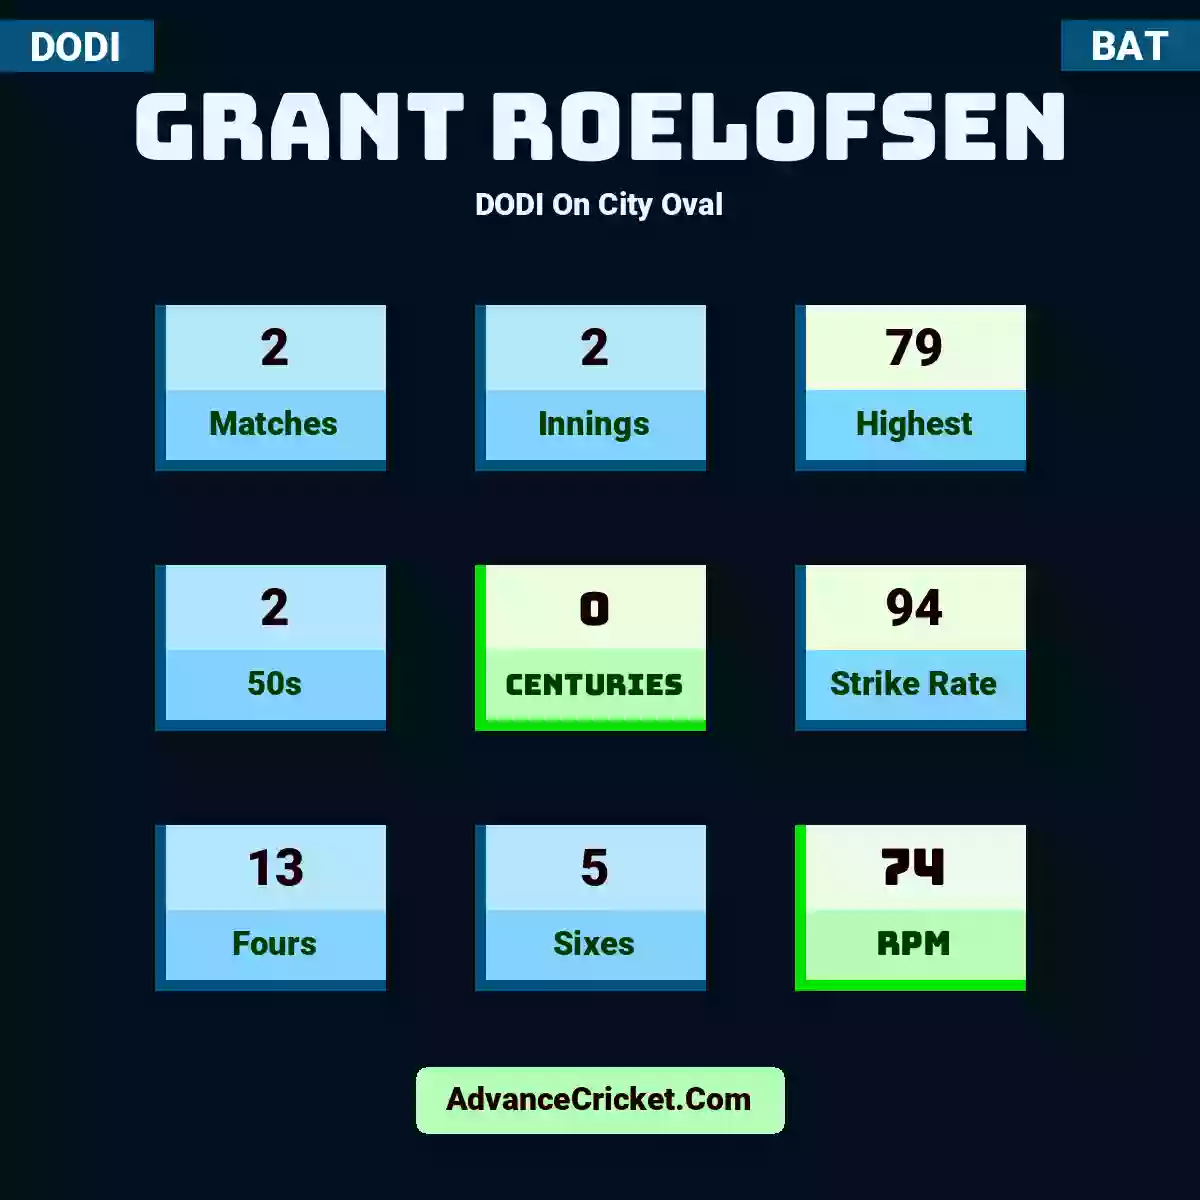 Grant Roelofsen DODI  On City Oval, Grant Roelofsen played 2 matches, scored 79 runs as highest, 2 half-centuries, and 0 centuries, with a strike rate of 94. G.Roelofsen hit 13 fours and 5 sixes, with an RPM of 74.